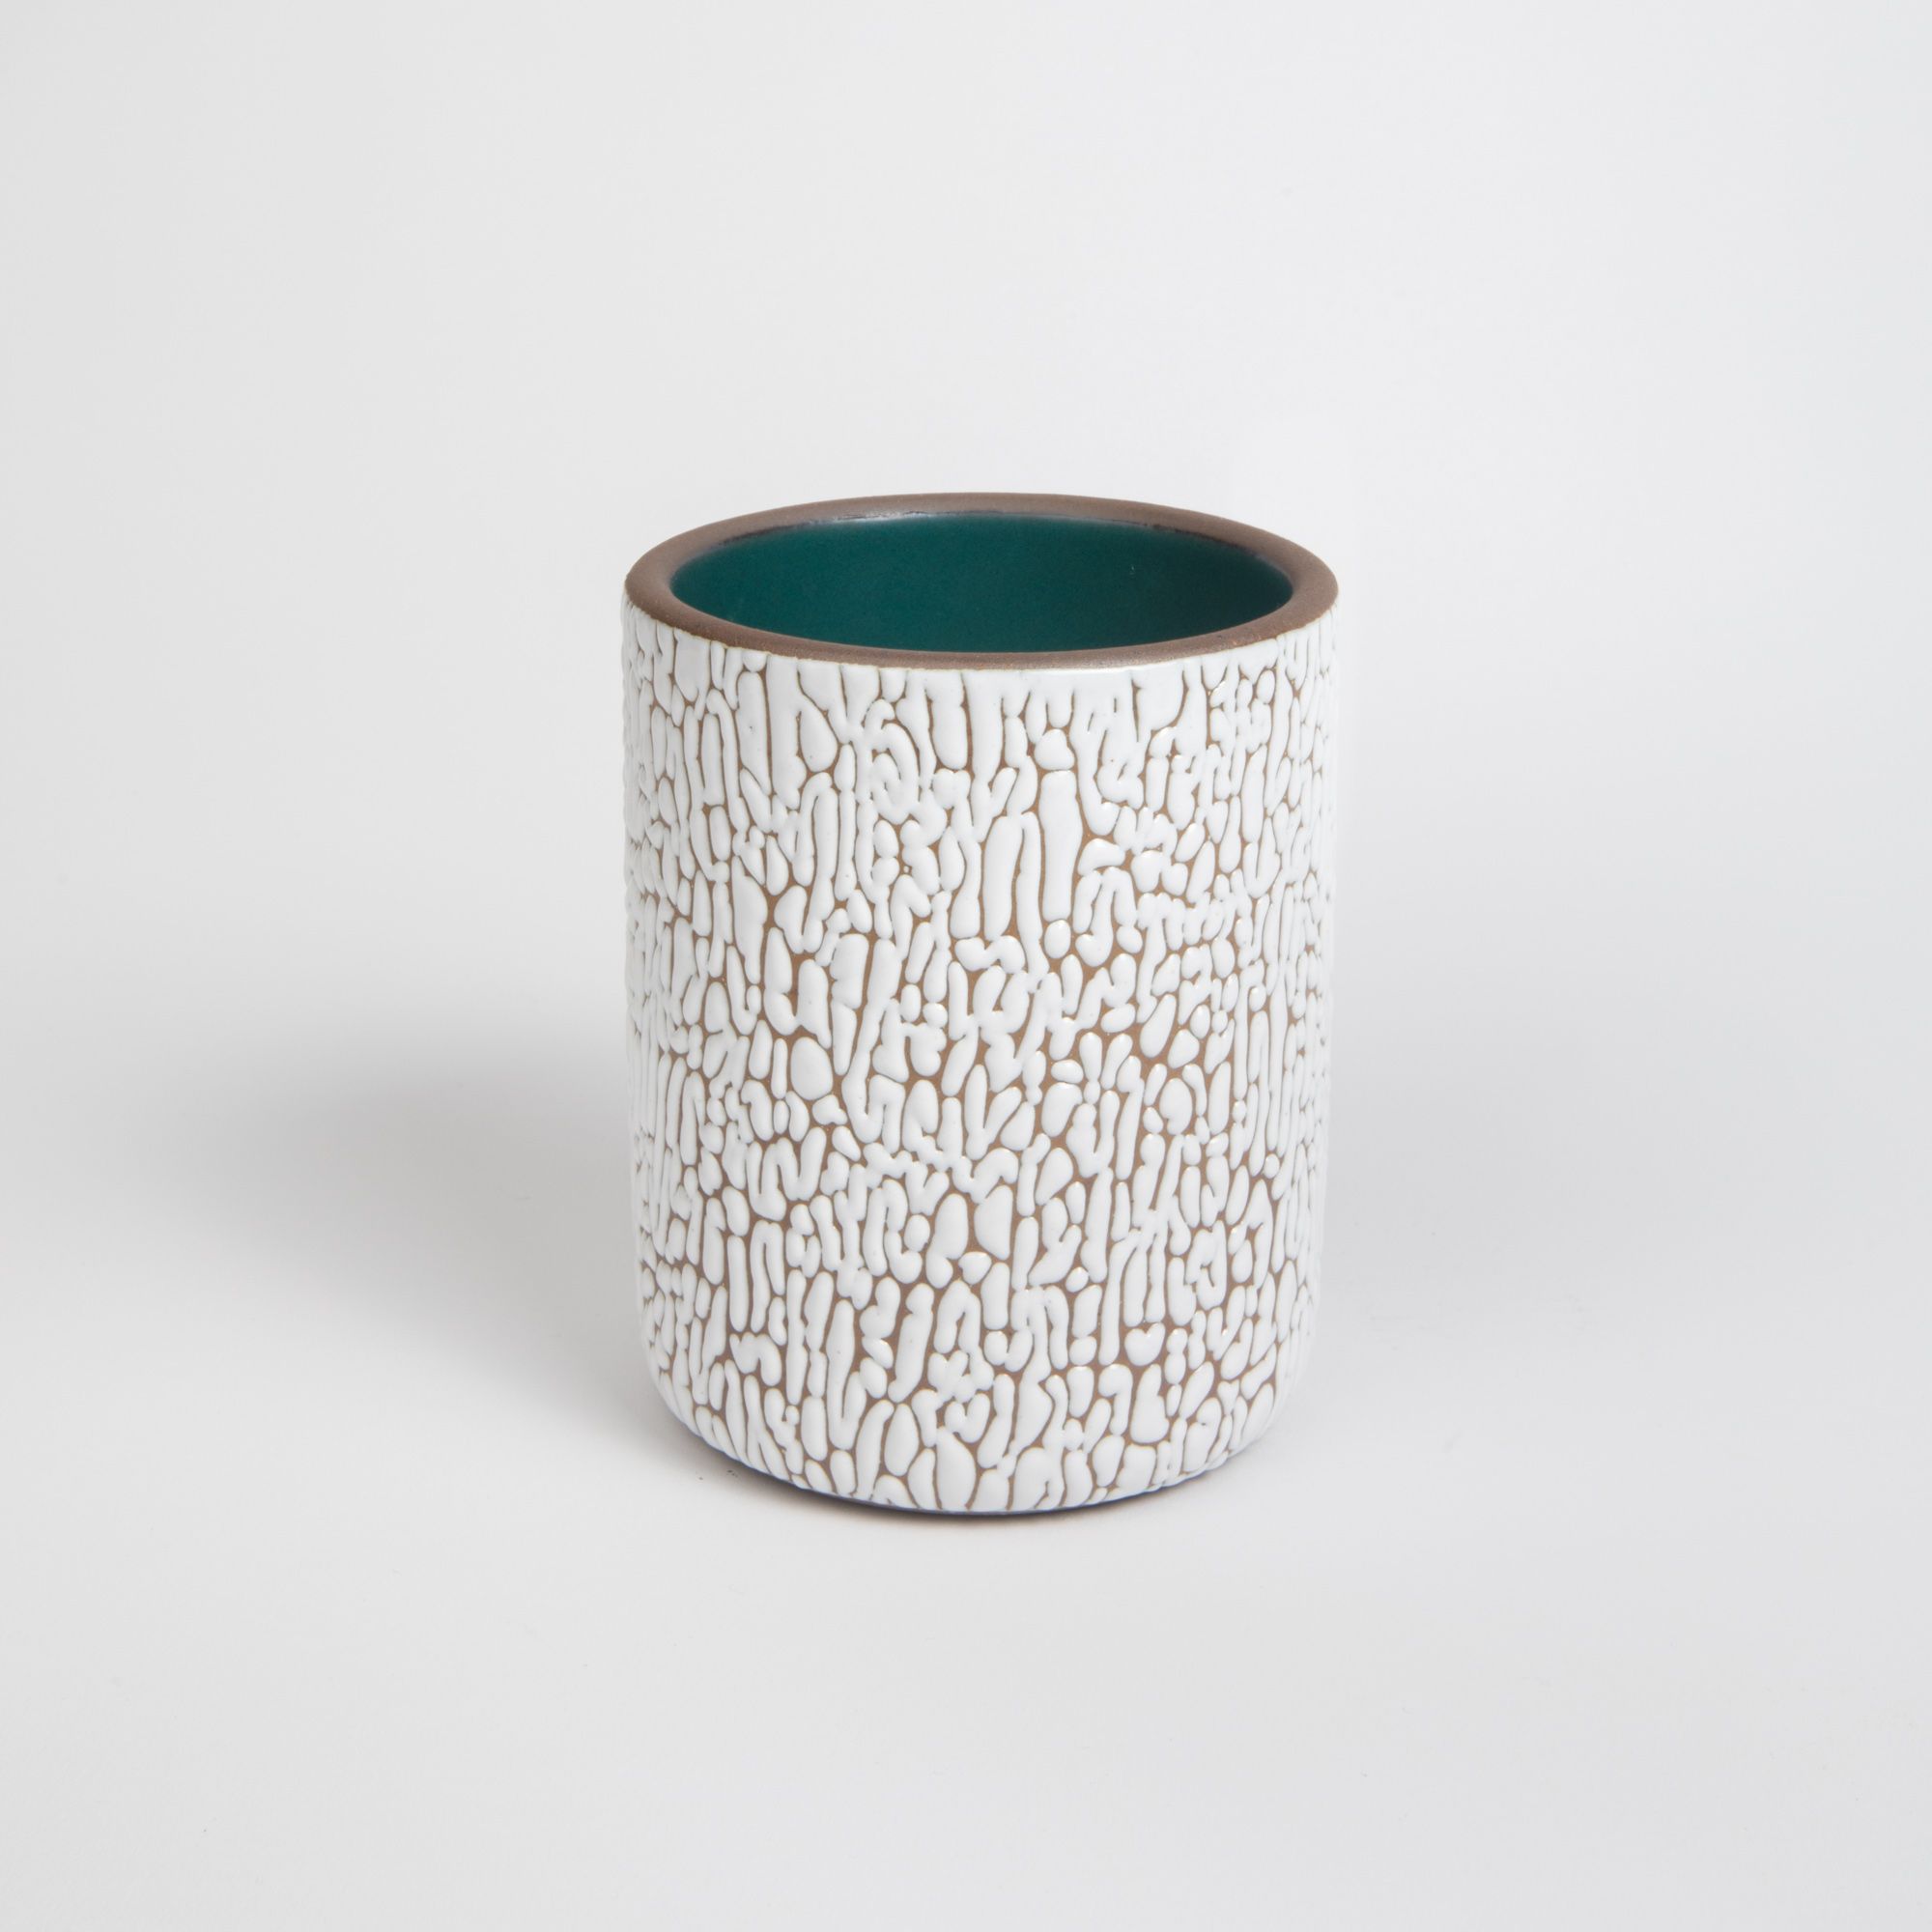 A big white ceramic vessel with cracked texture and the interior being dark teal